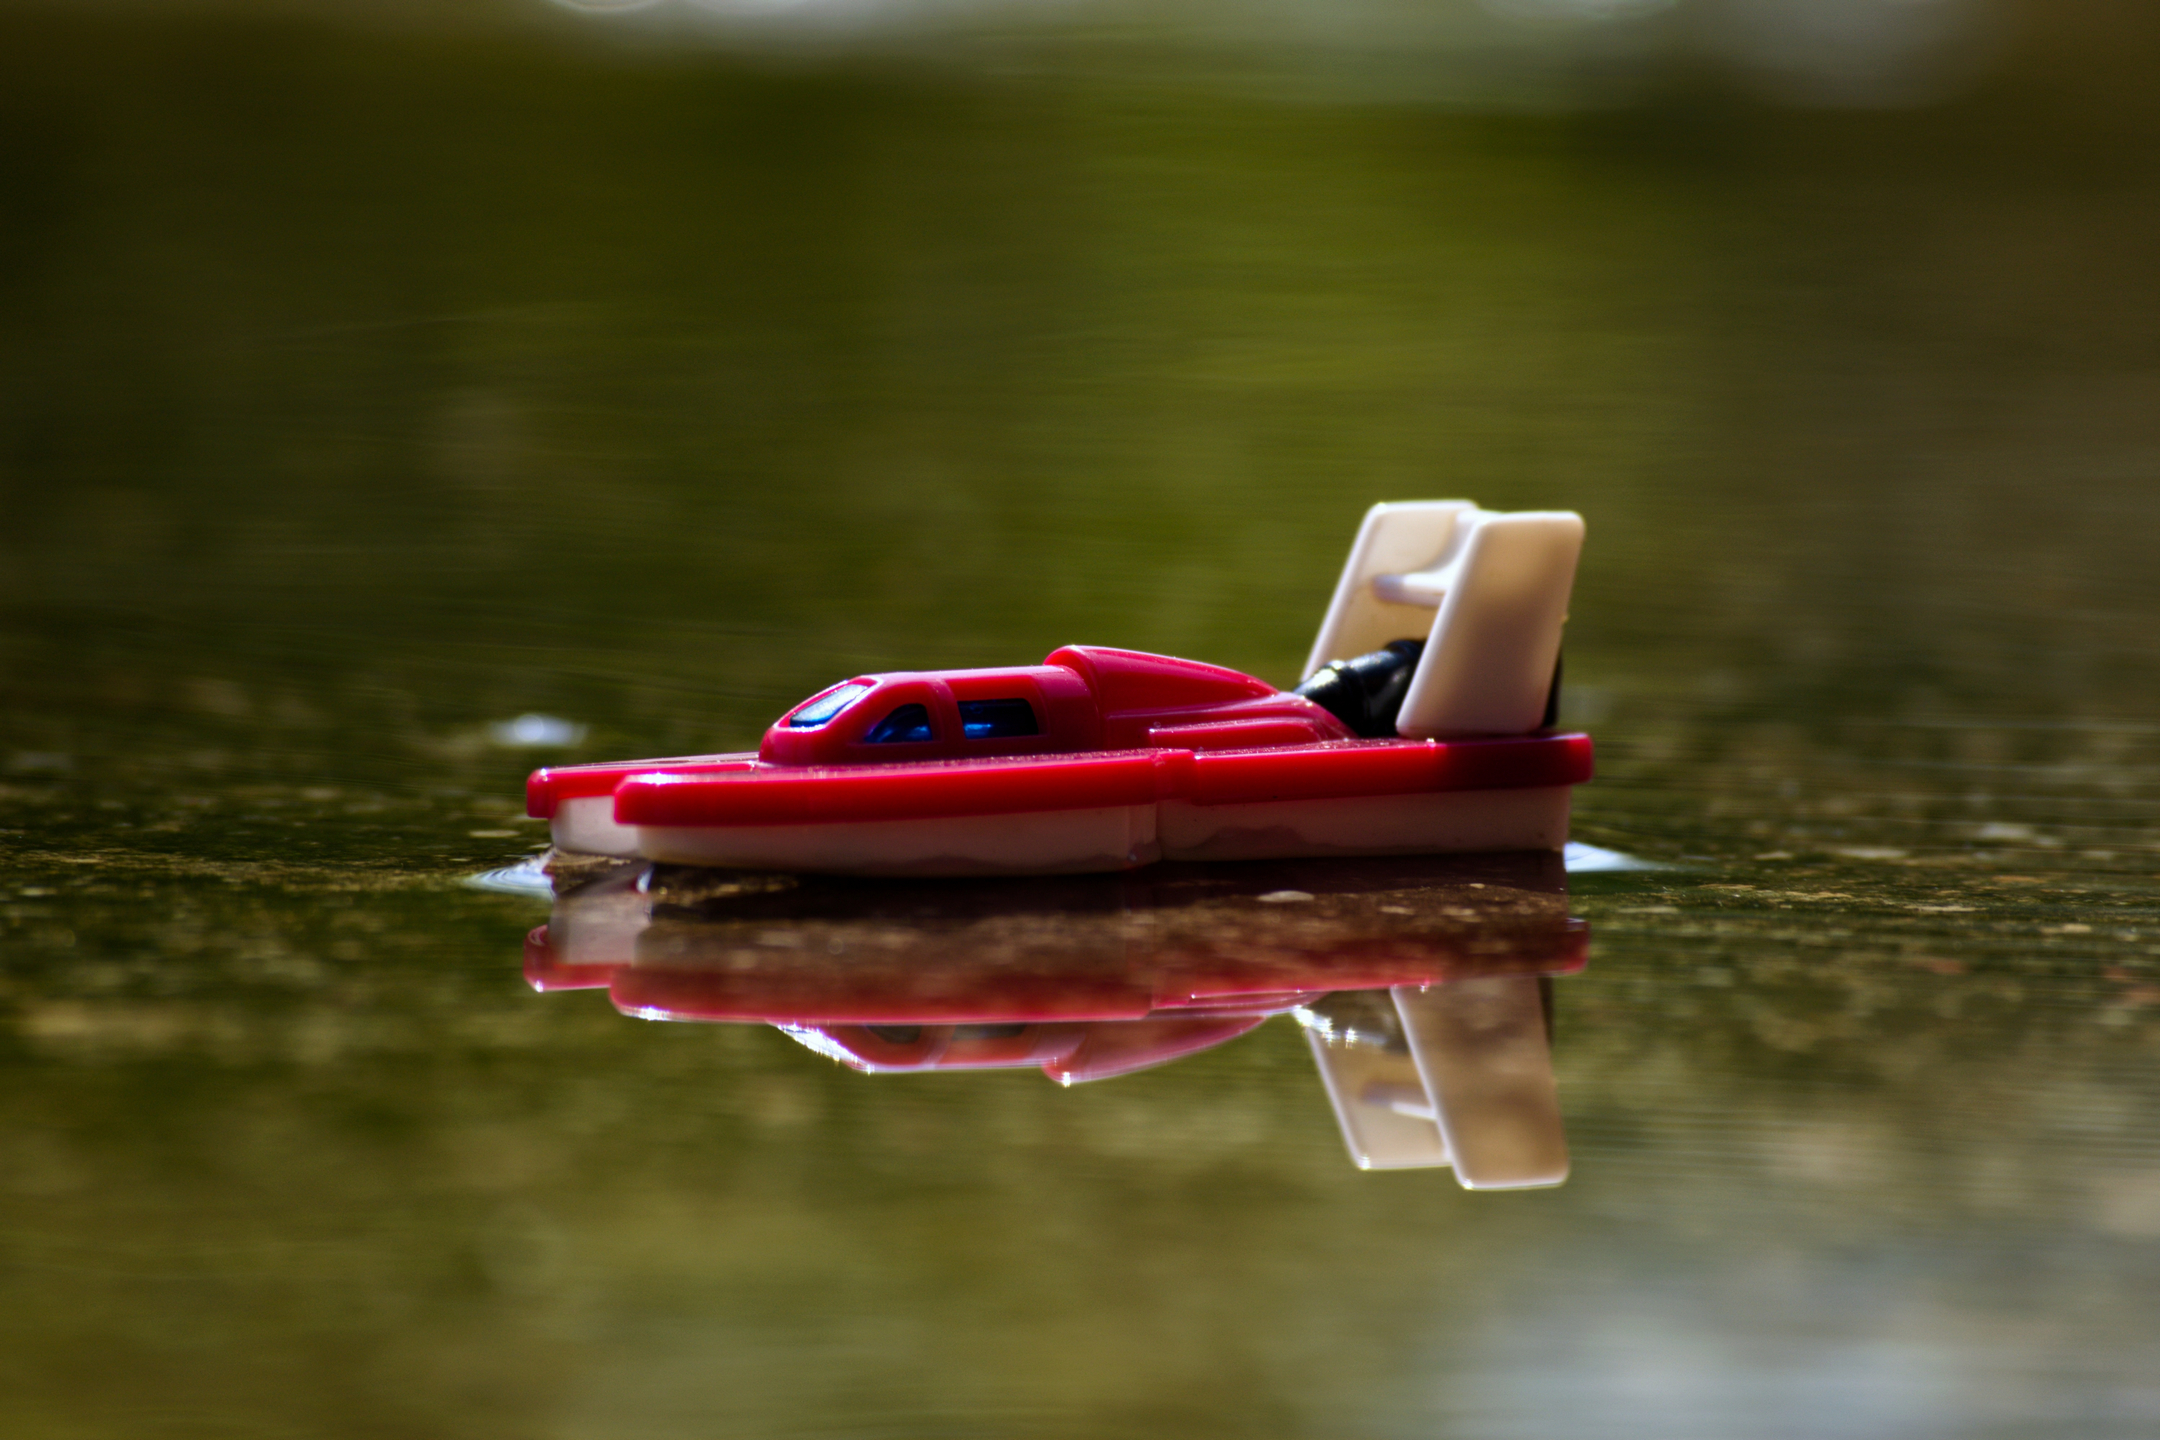 General 2160x1440 toys reflection water minimalism simple background